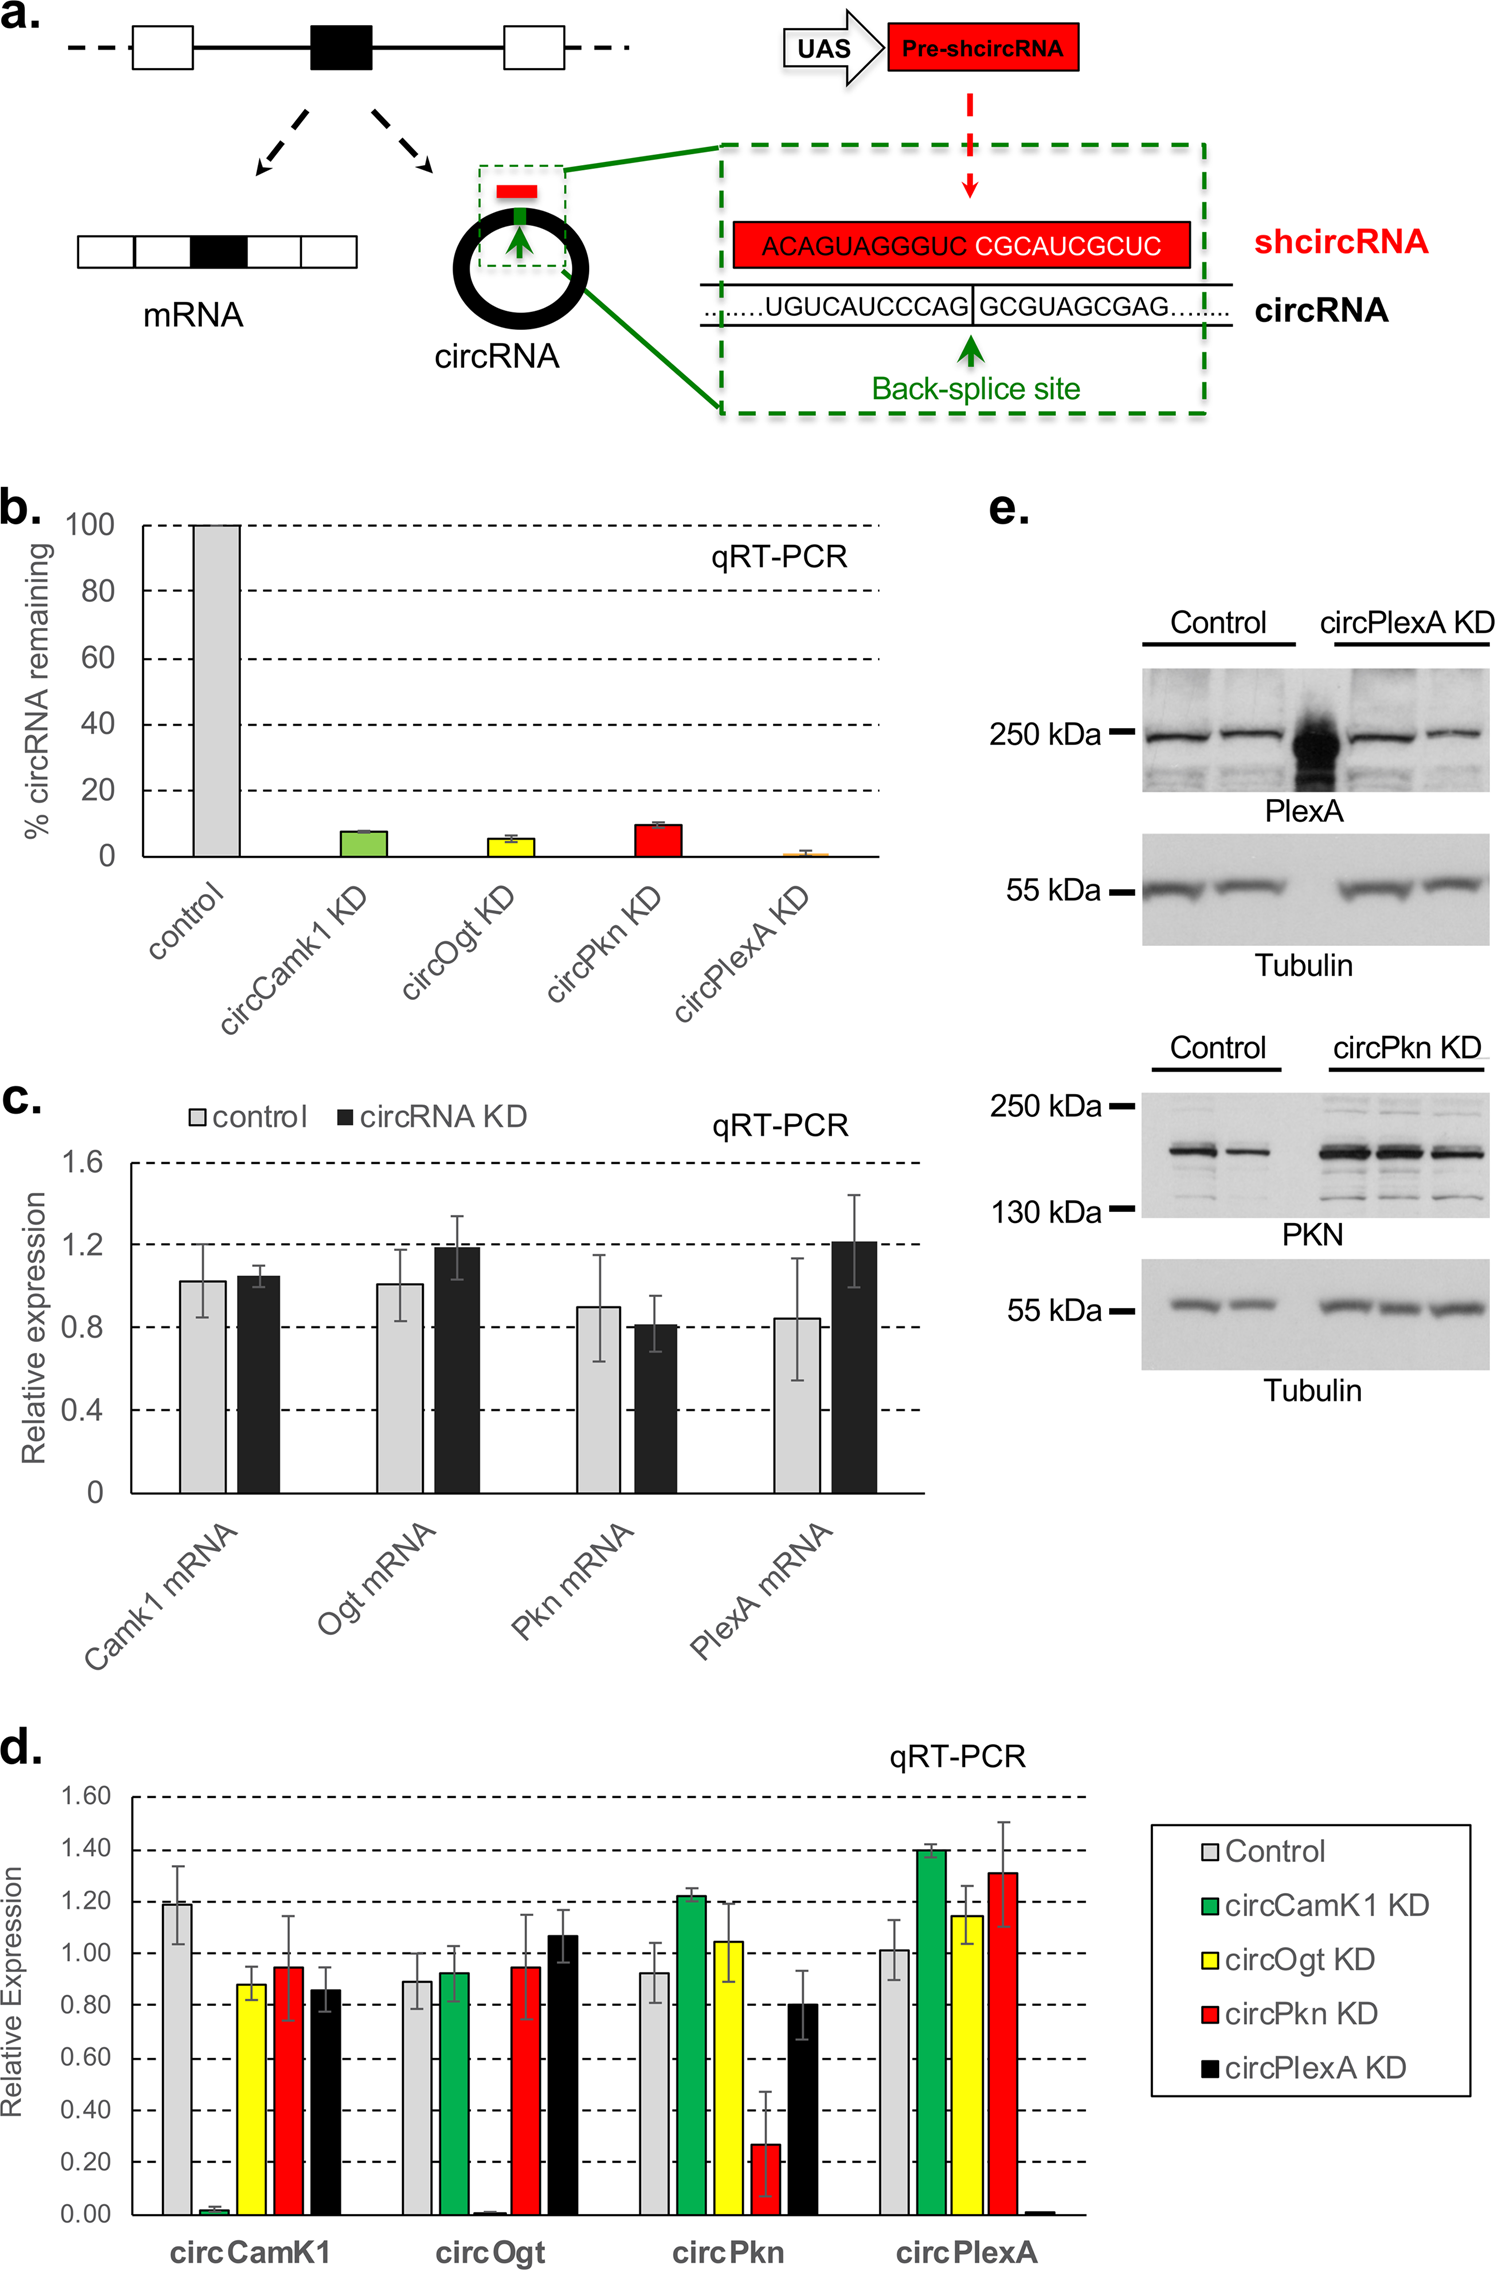 Analysis of DMC1 Knockdowns Generated by the In Vivo siRNA